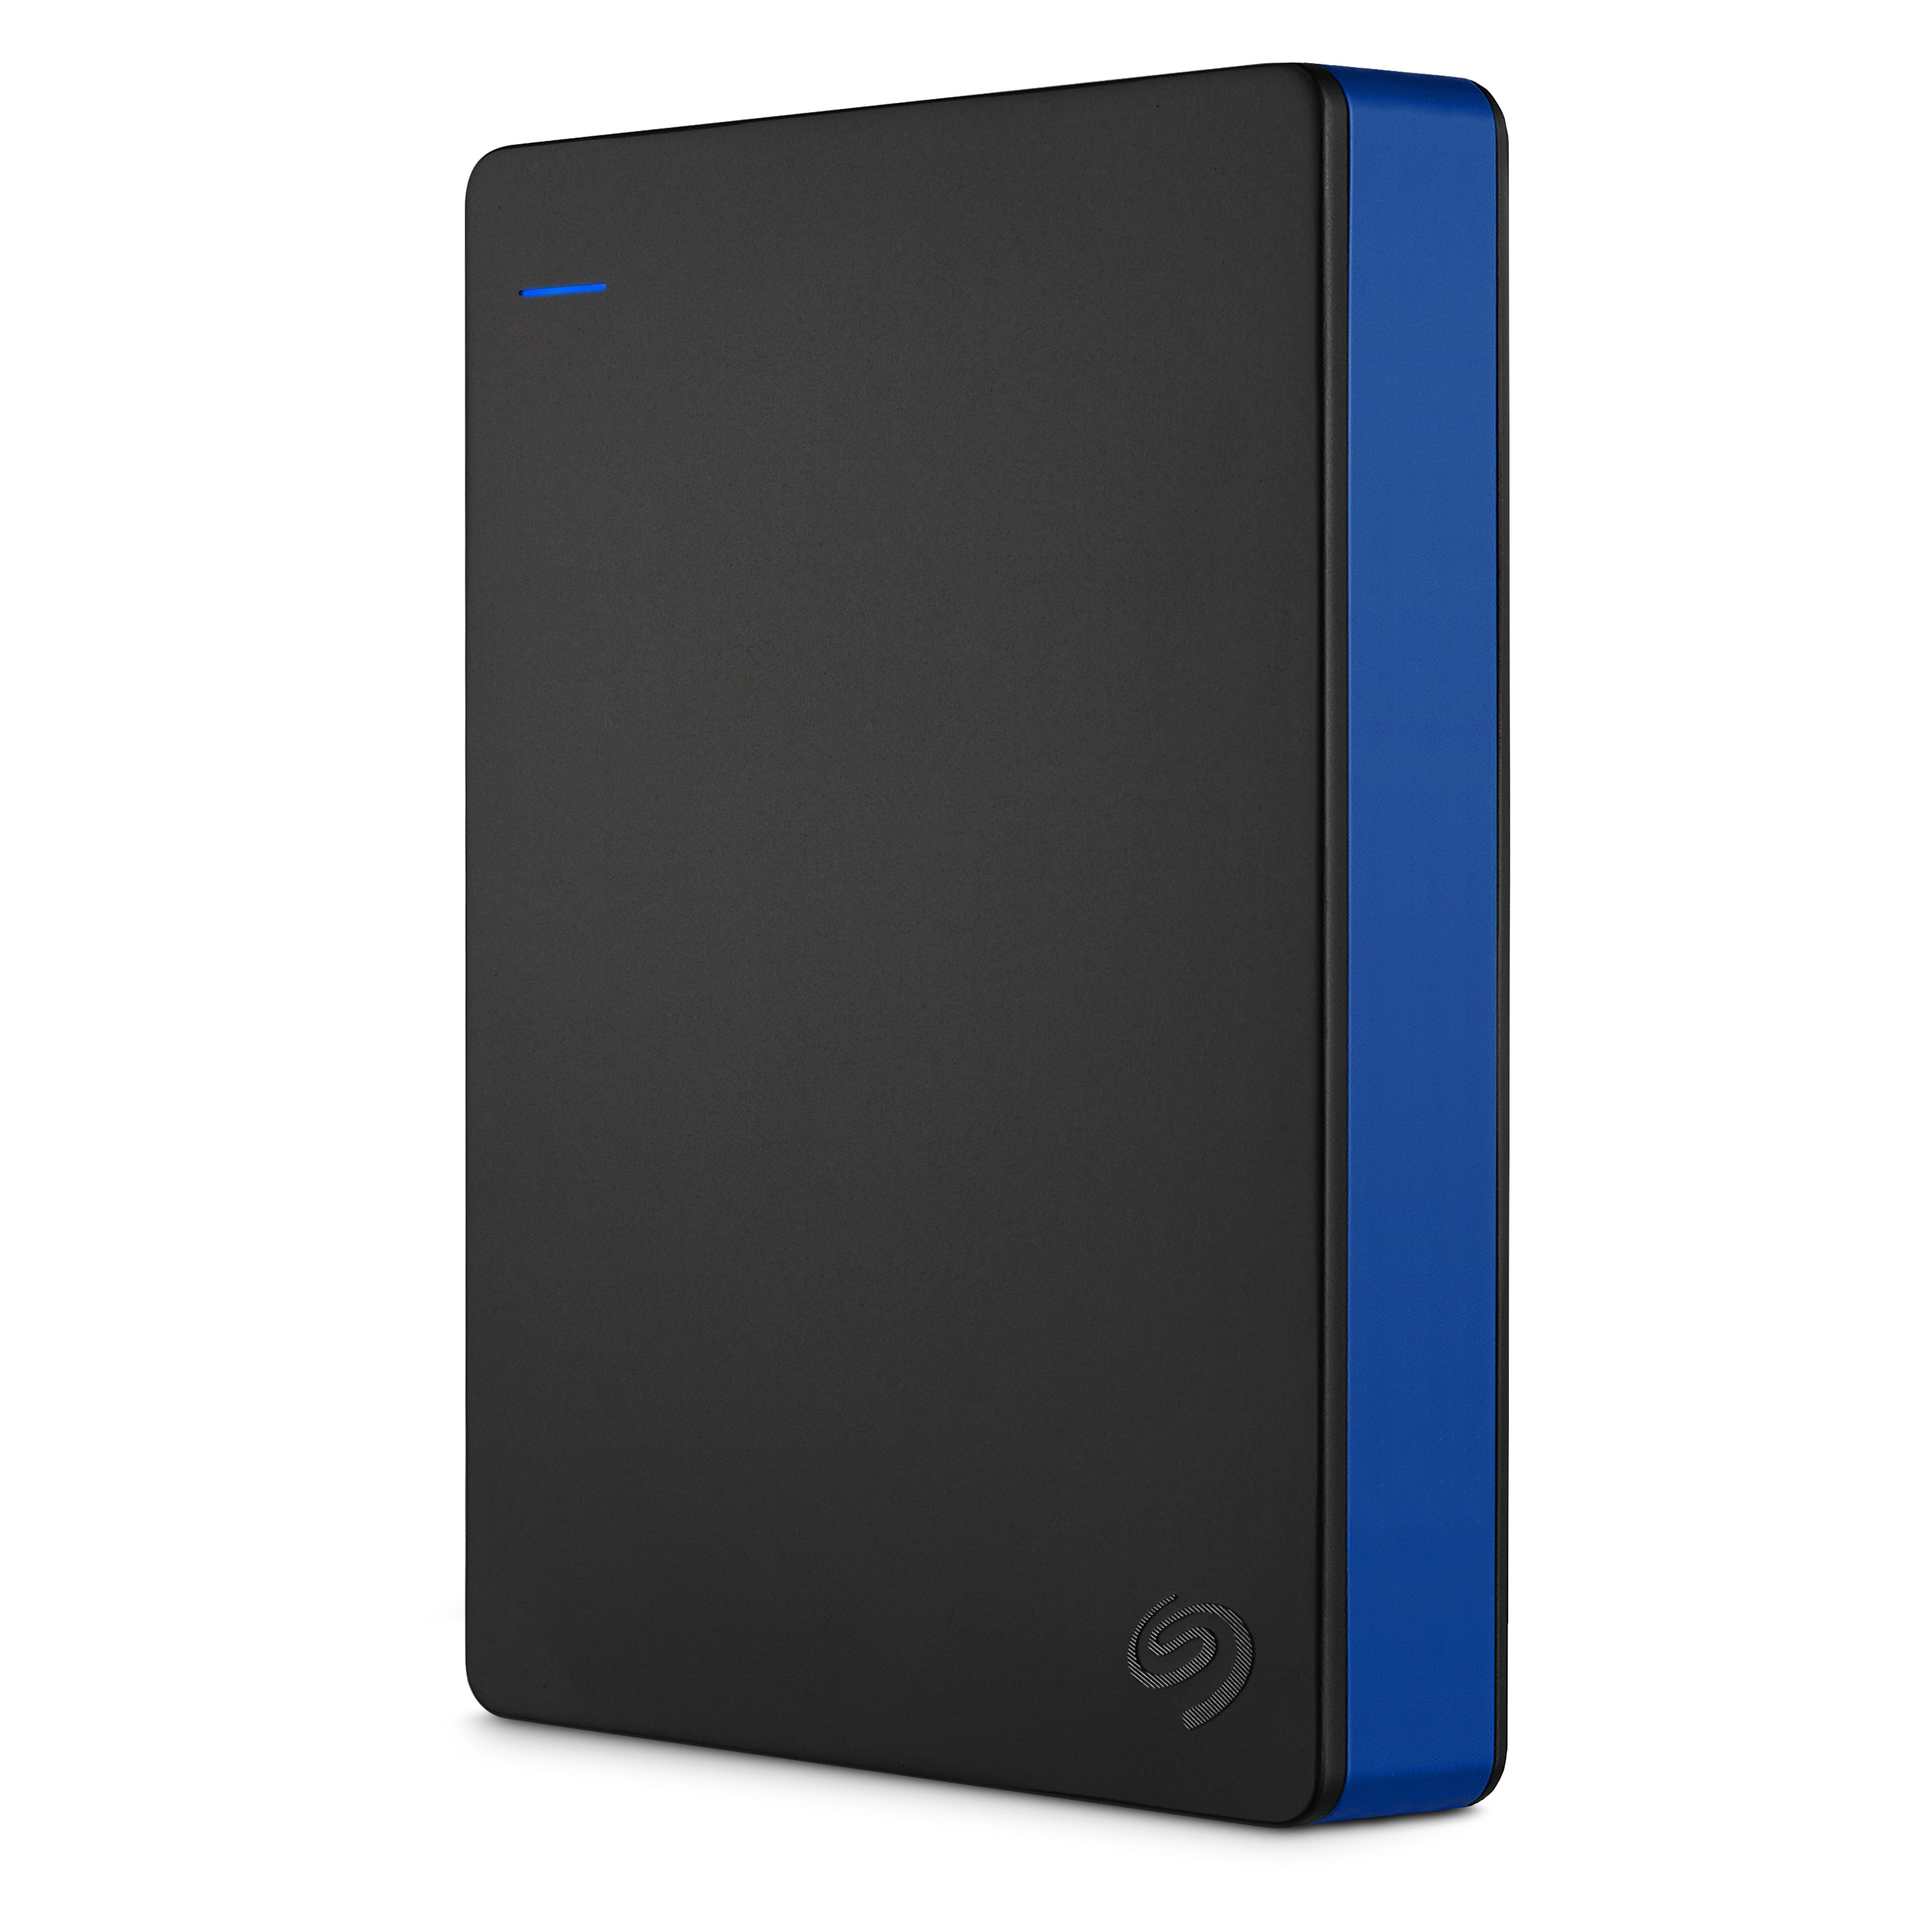 Seagate Game Drive for PlayStation 4TB External Hard Drive Portable-USB 3.0 (Black) - image 1 of 11